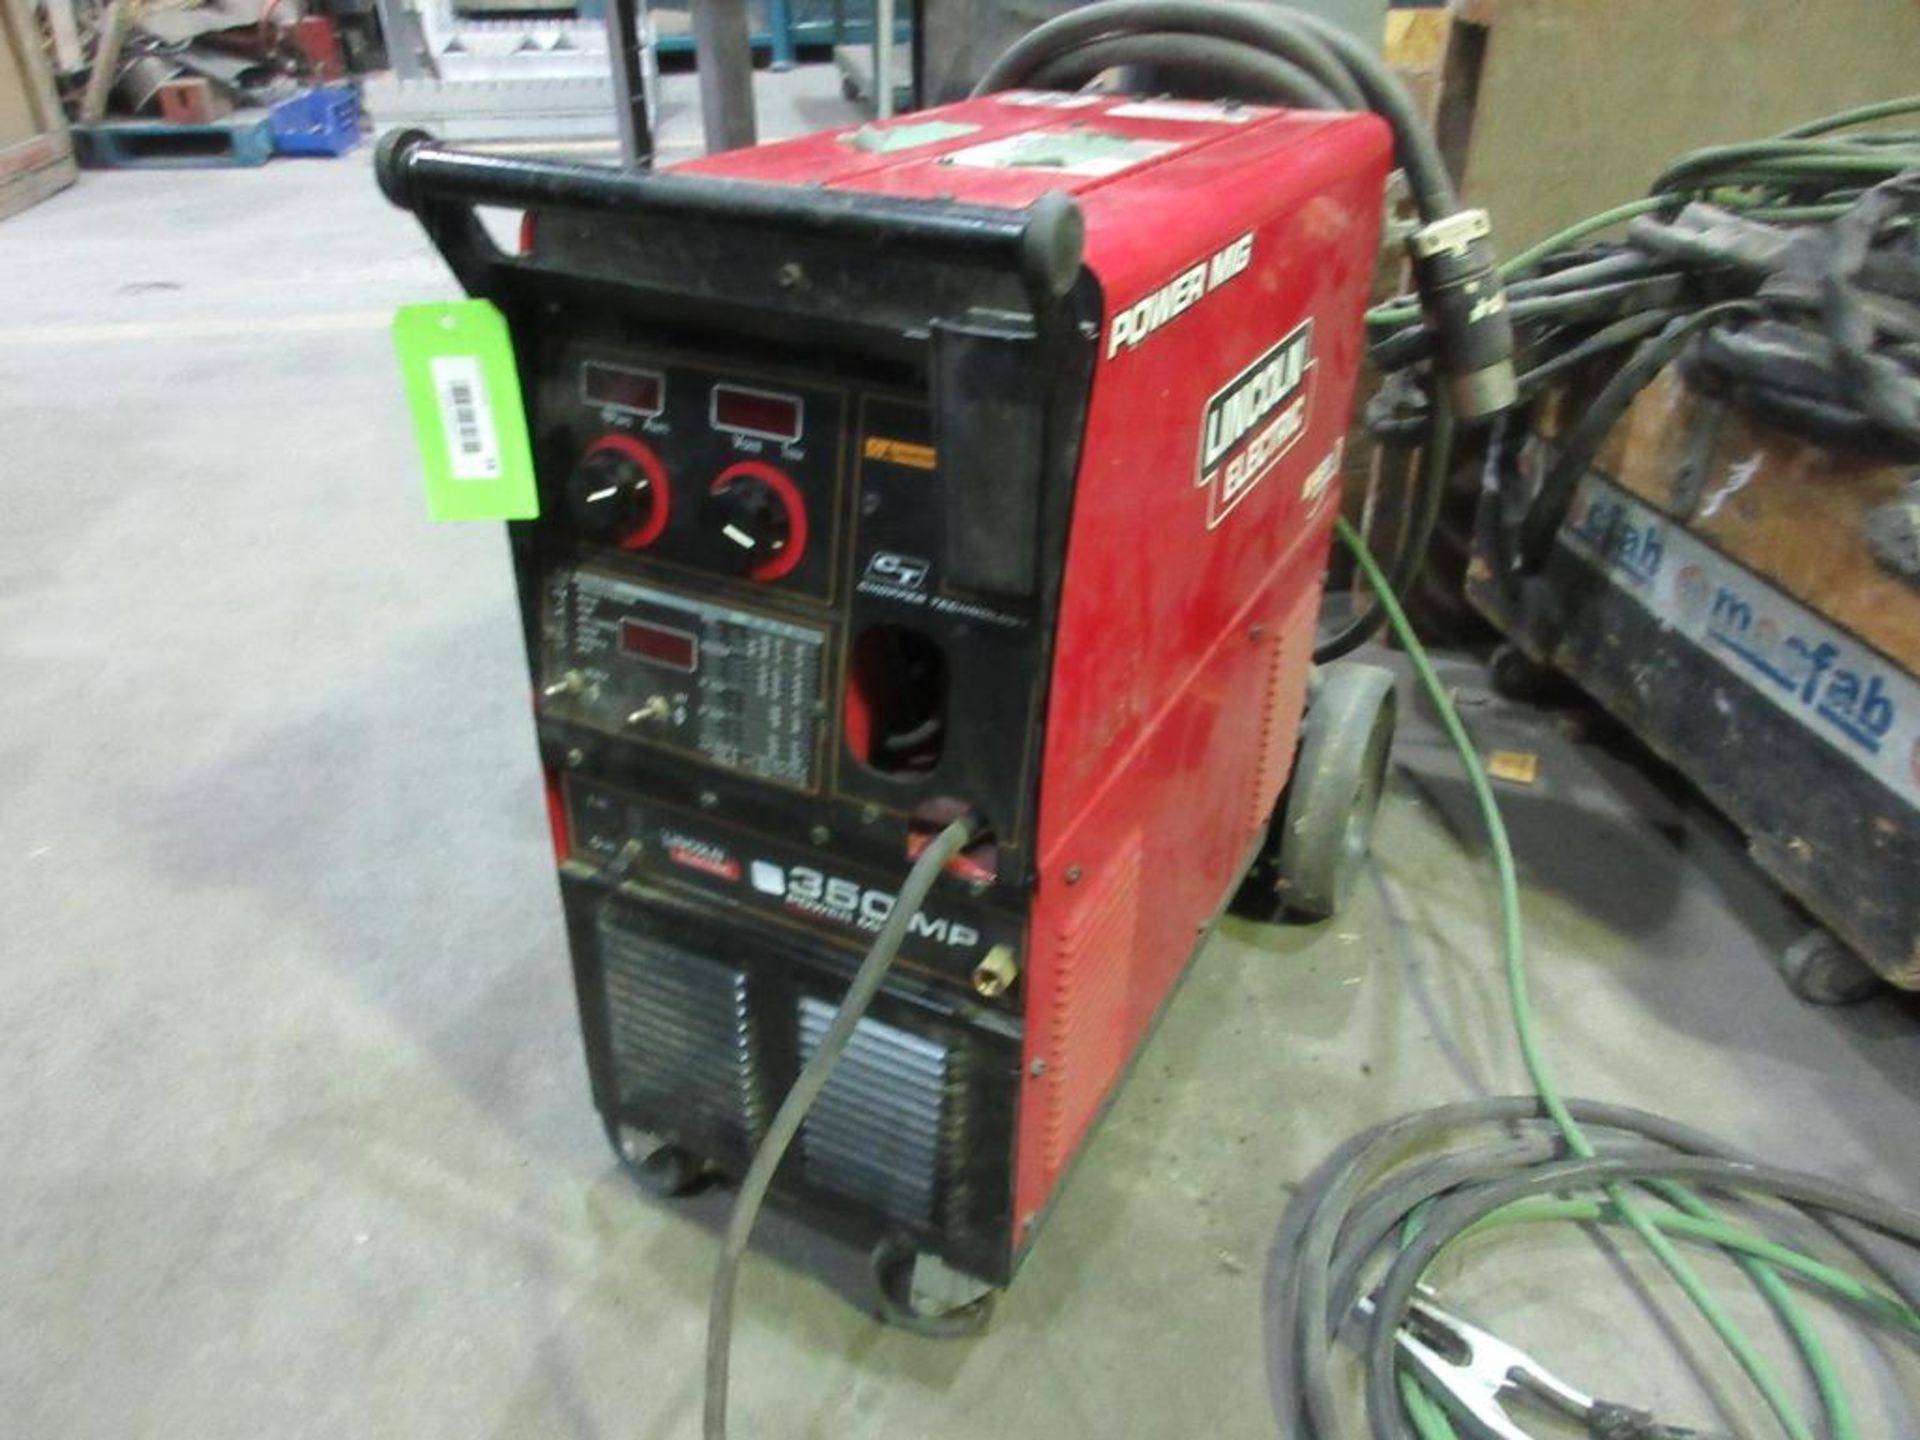 LINCOLN ELECTRIC 350MP WELDER, S/N U117080611 W/CART (NO CABLES) [LOCATED AT 1401 GRAHAM-BELL, BOUCH